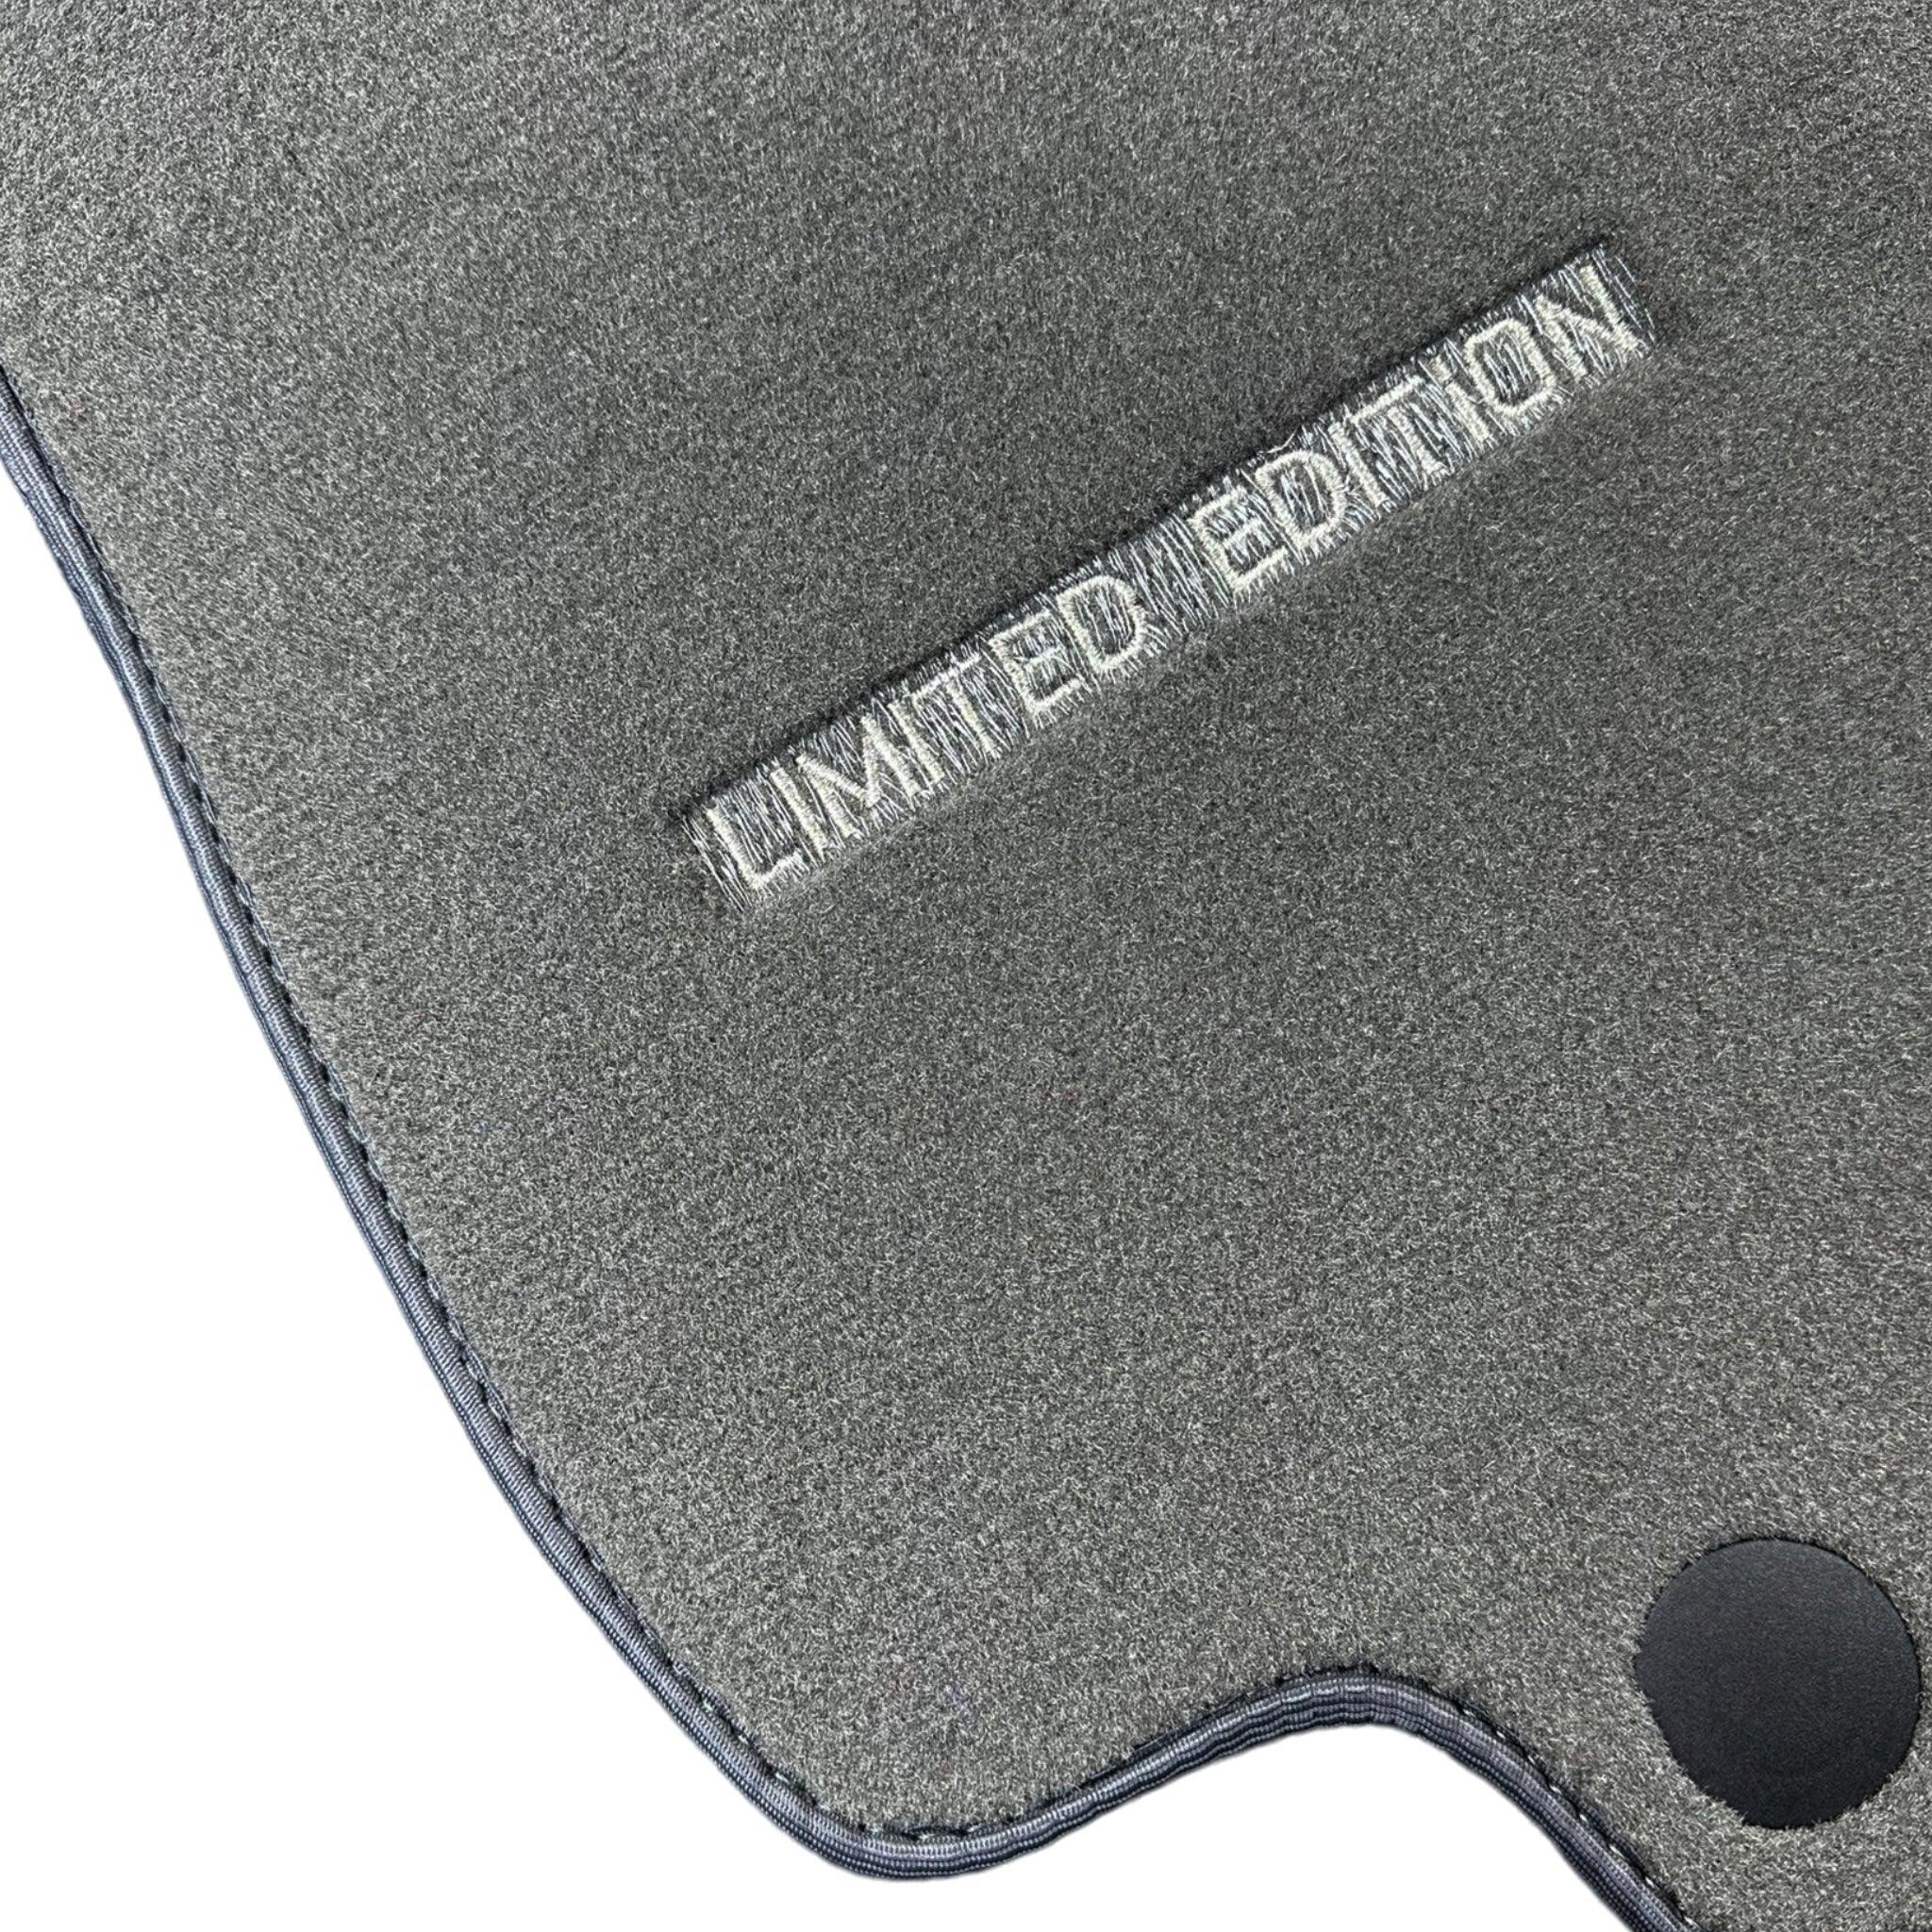 Gray Floor Mats For Mercedes Benz S-Class C126 Coupe (1981-1991) | Limited Edition